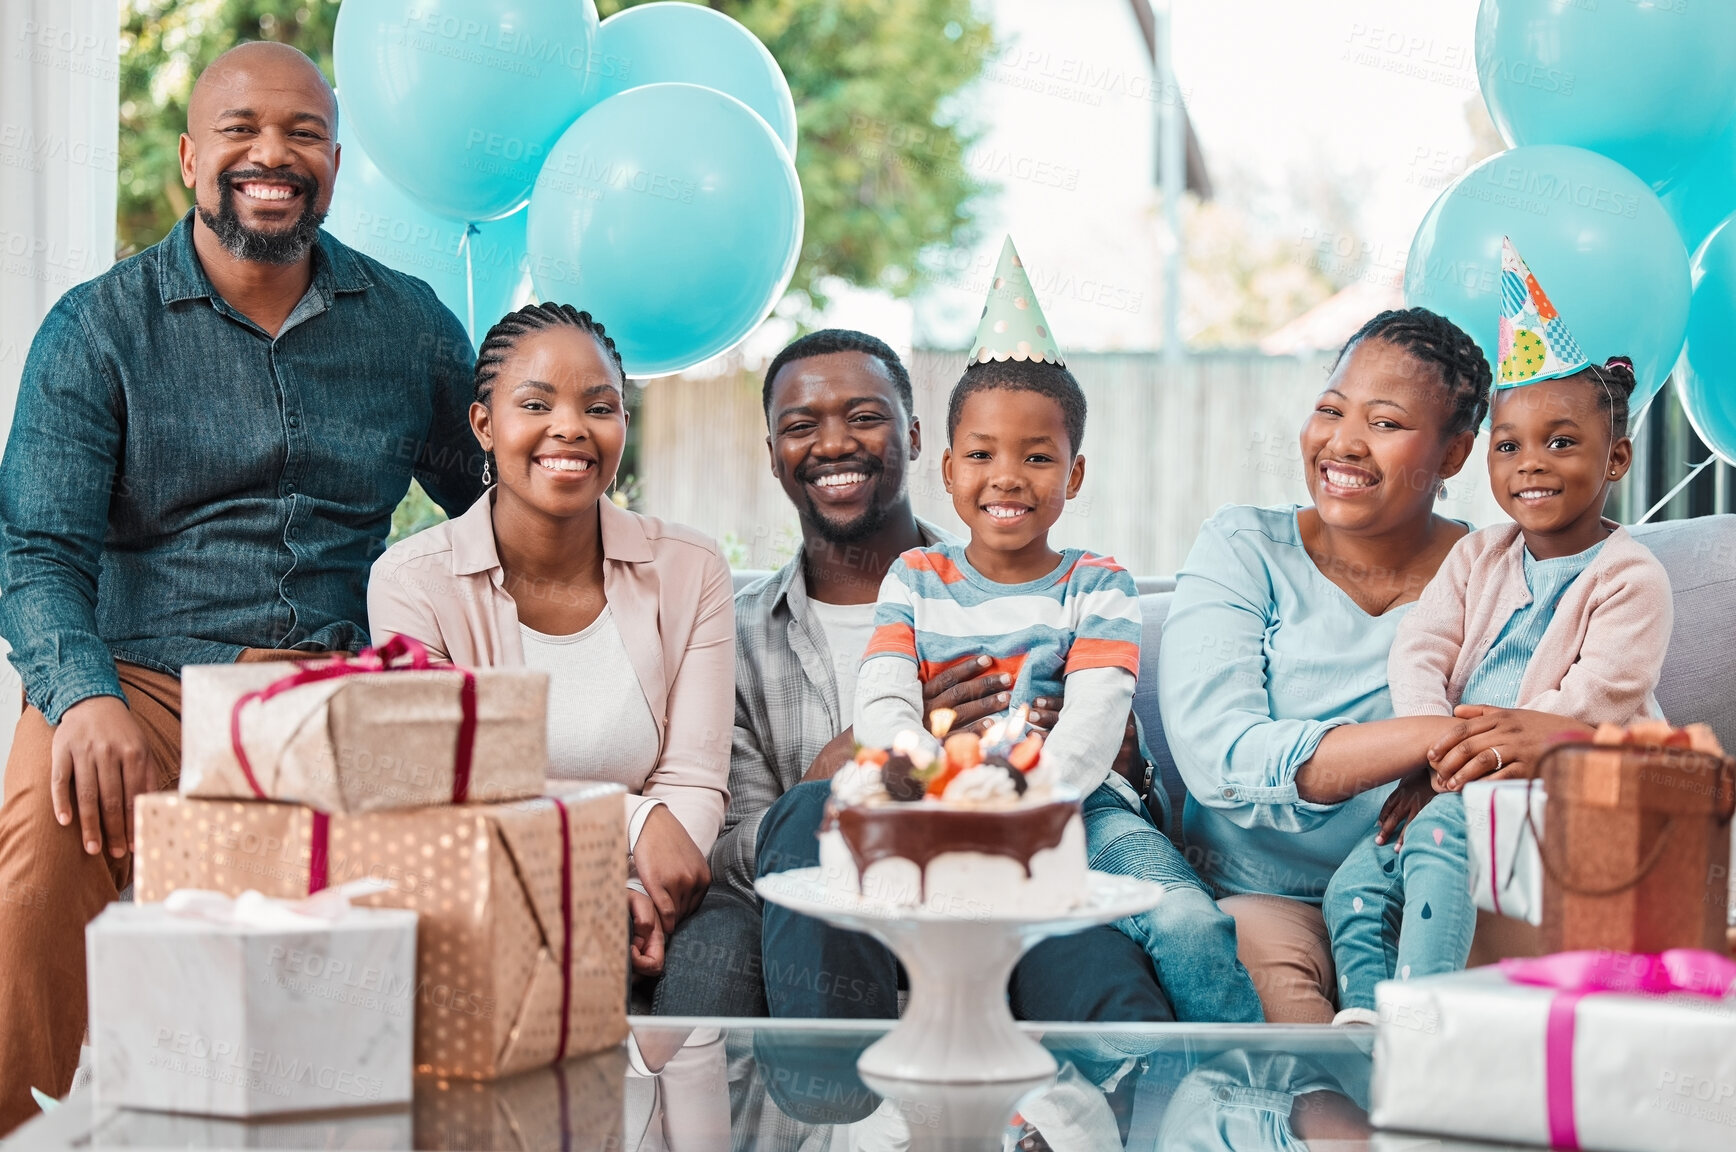 Buy stock photo Shot of a multi-generational family celebrating a birthday at home